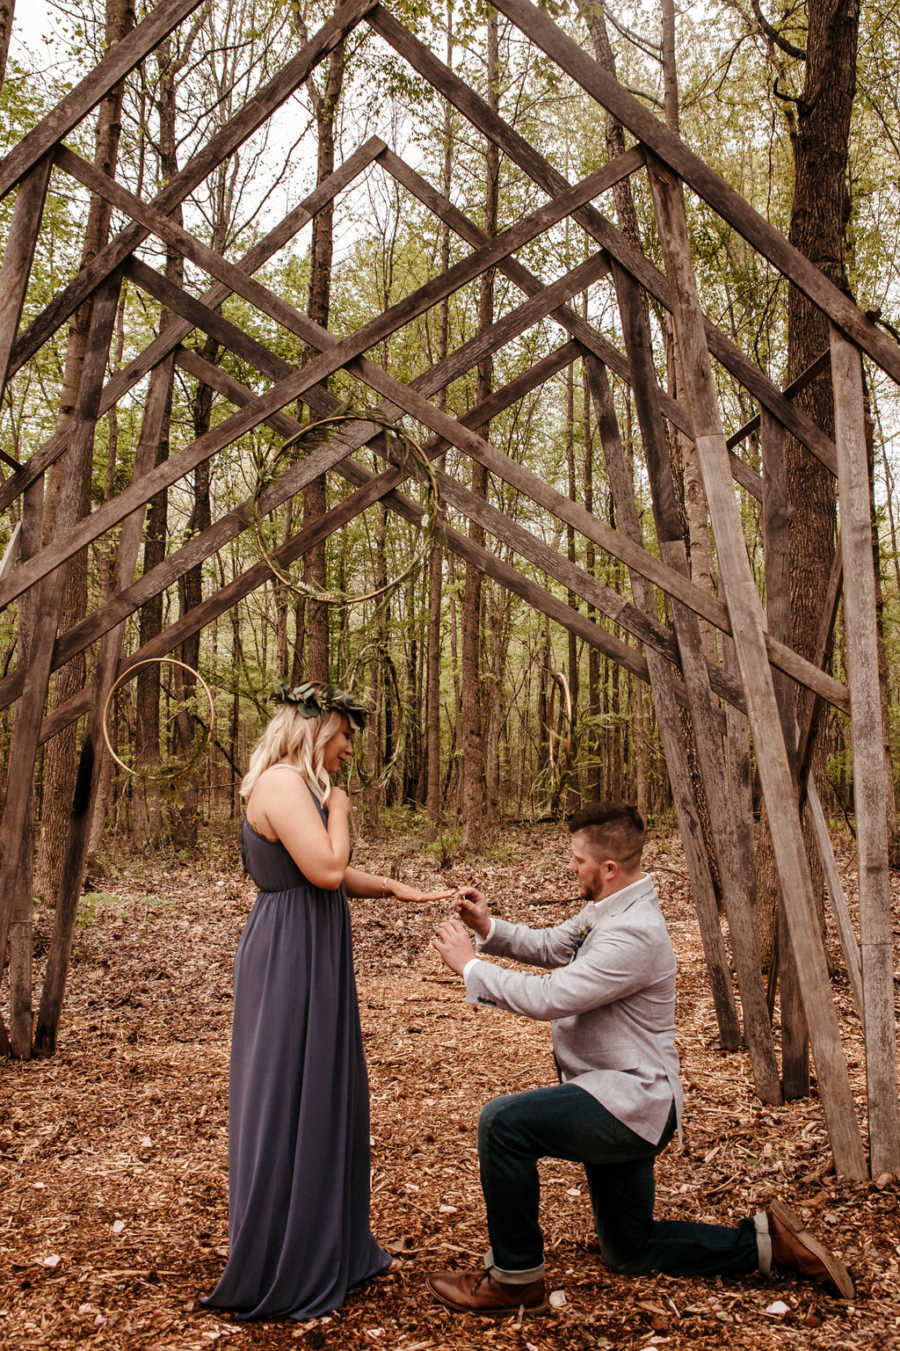 Boyfriend placing engagement ring on girlfriend as he proposes under wooden arch